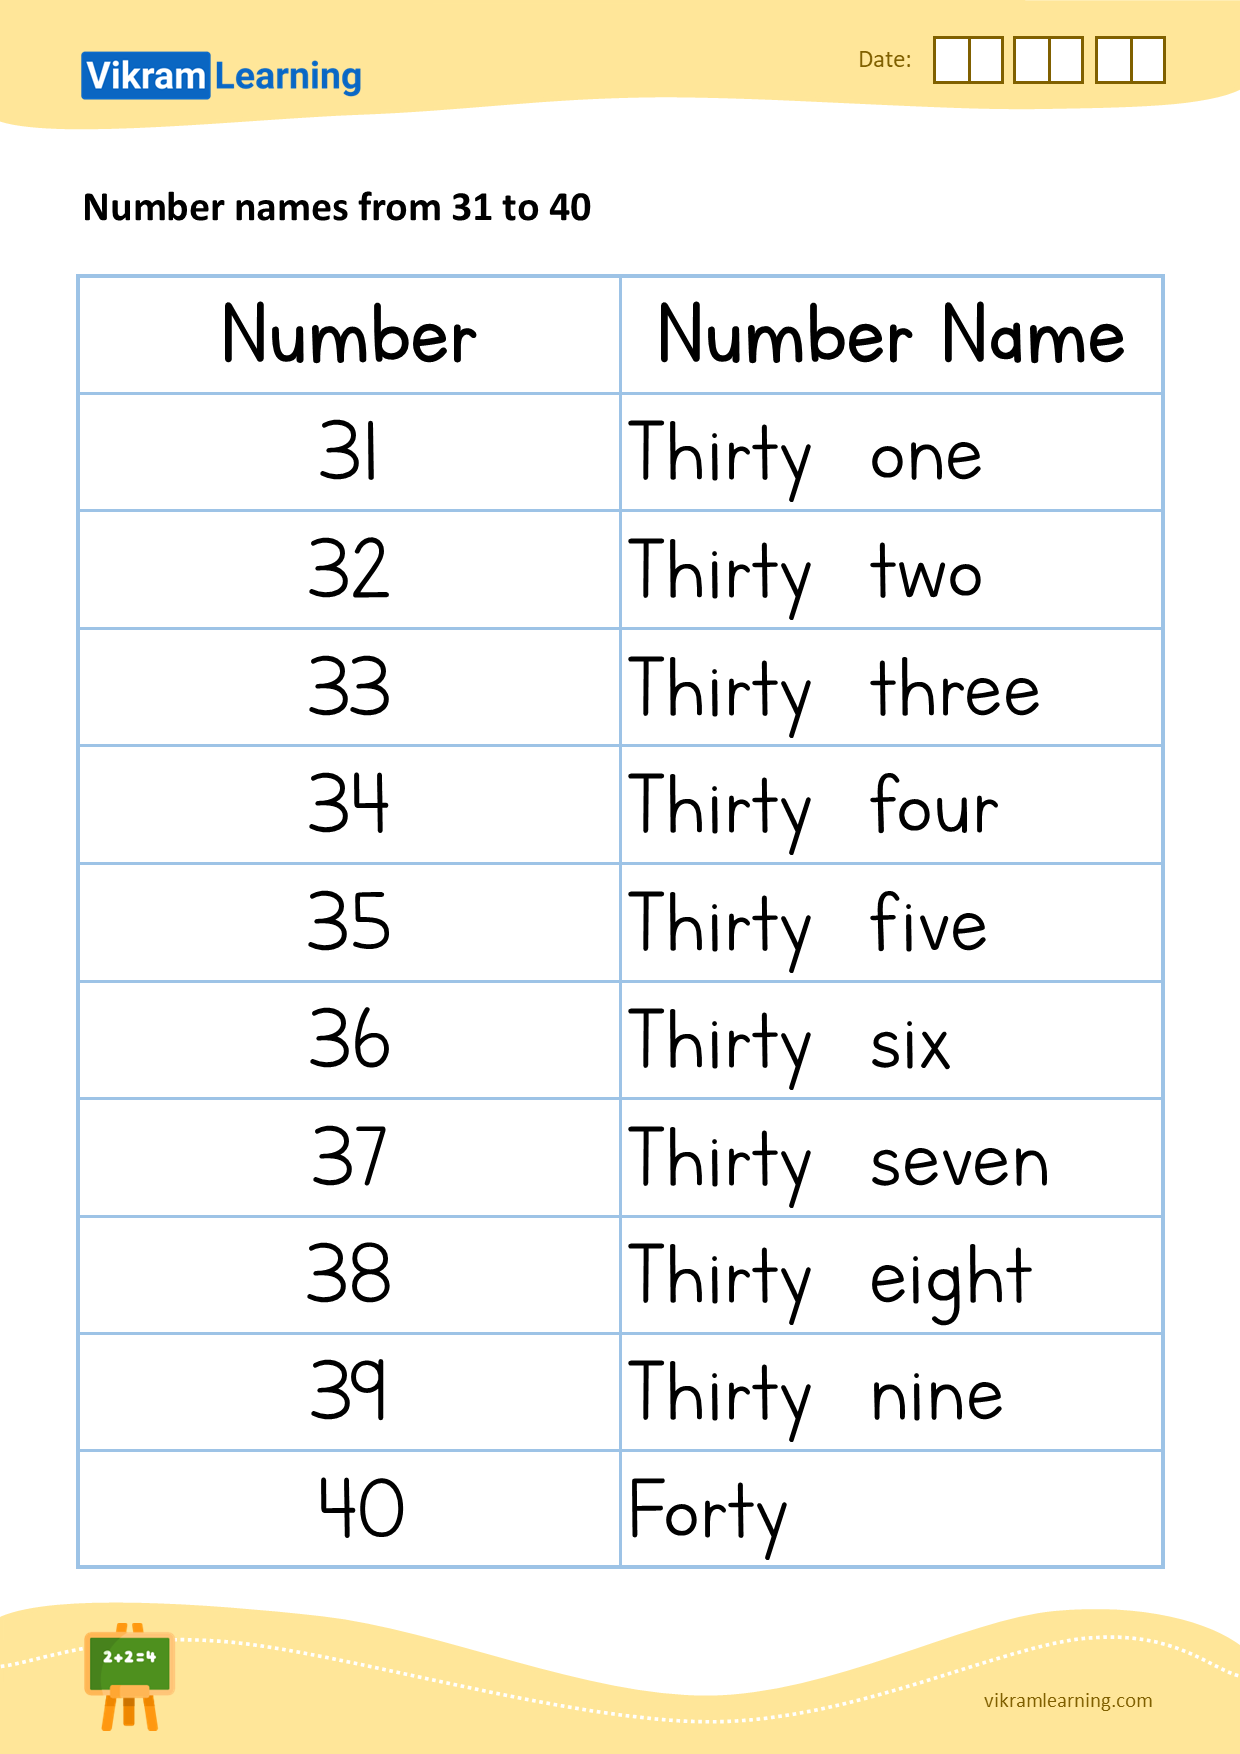 download-number-names-from-31-to-40-worksheets-vikramlearning